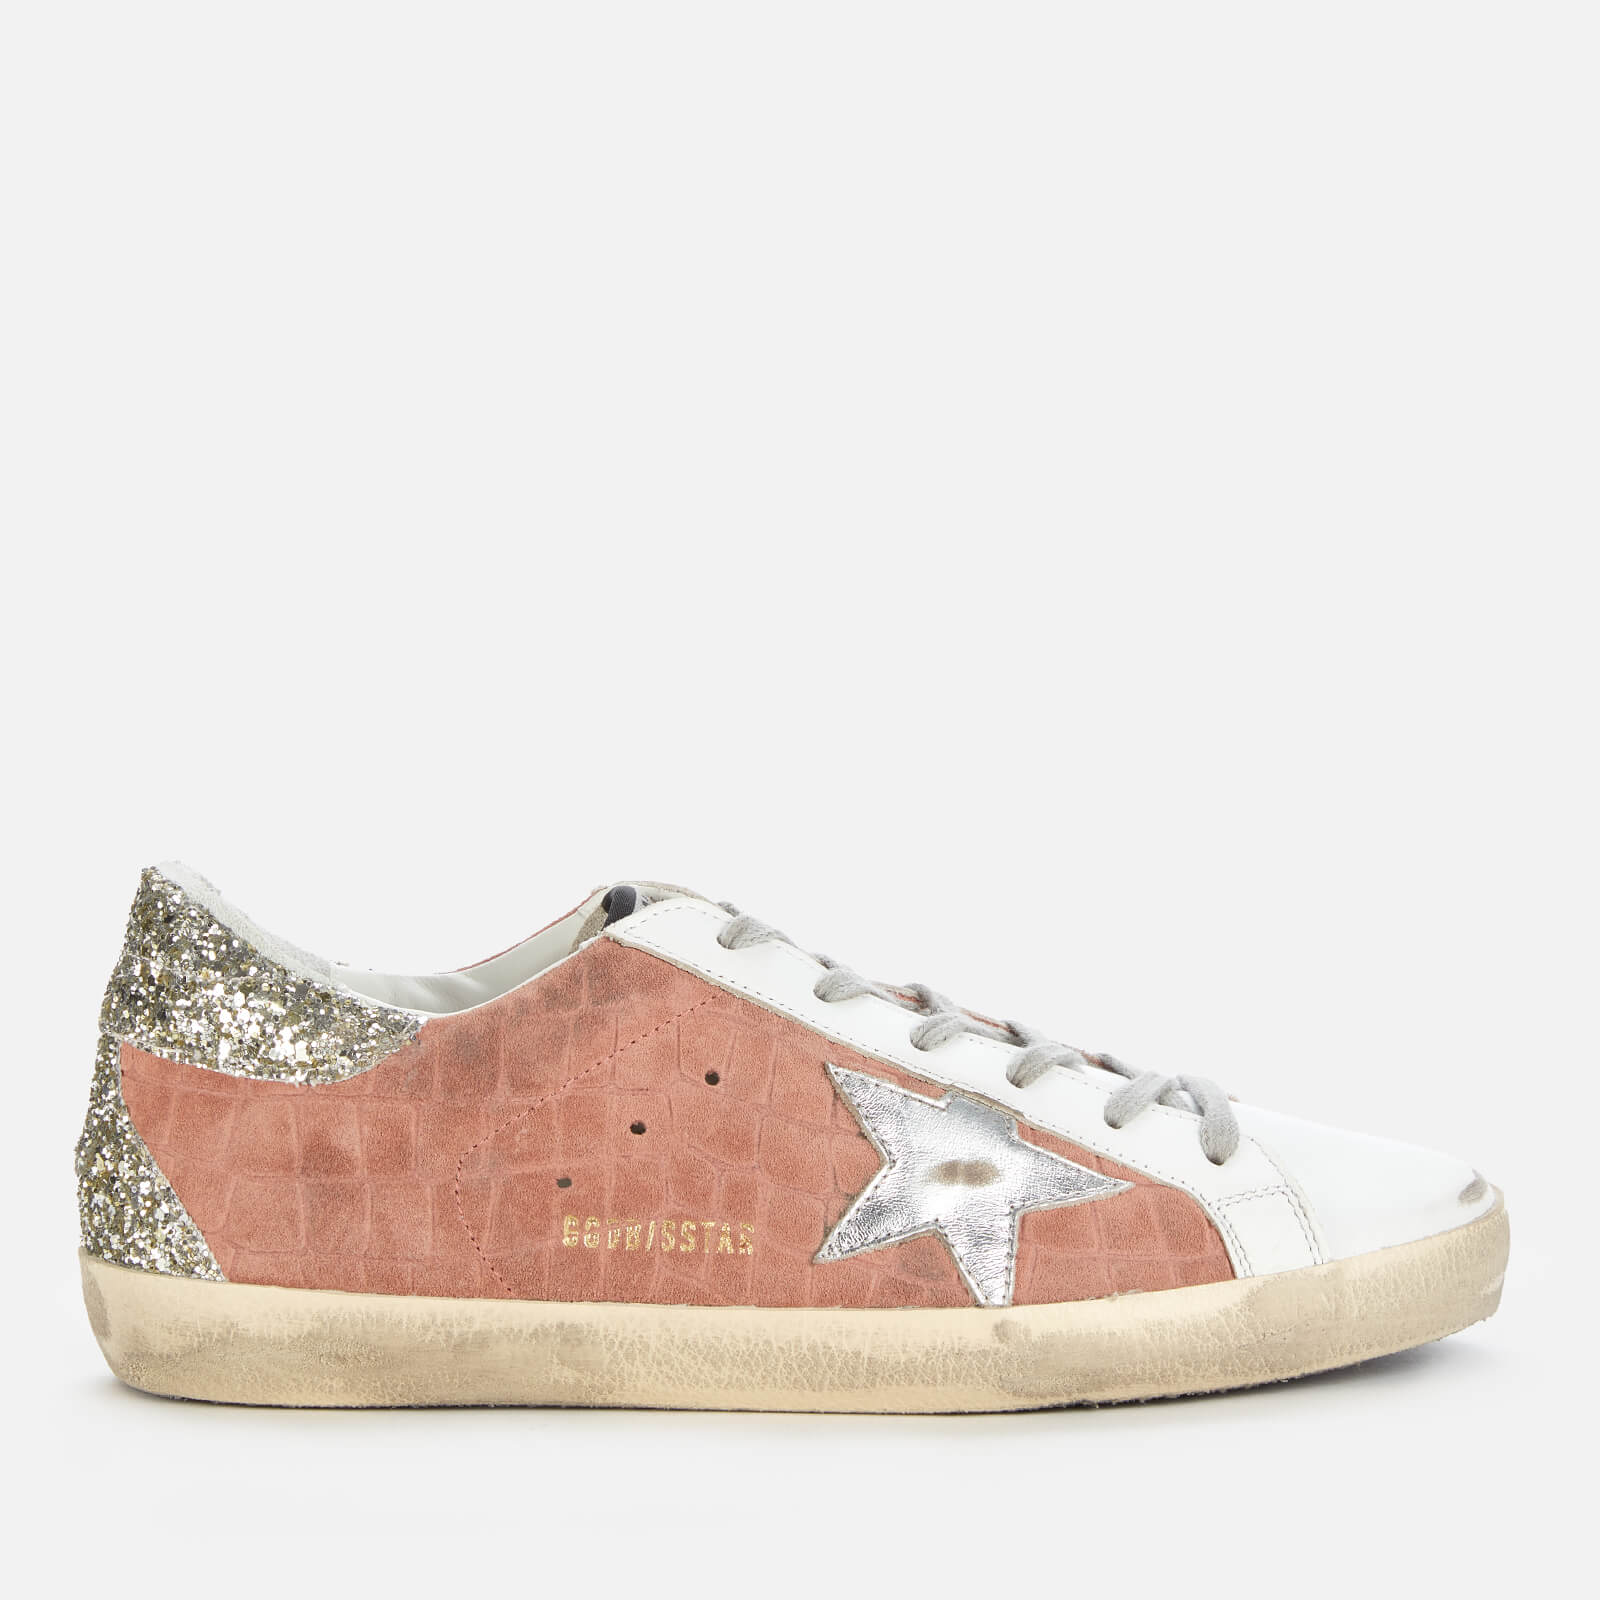 golden goose women's superstar croc printed leather trainers - mauve/white/silver - uk 8